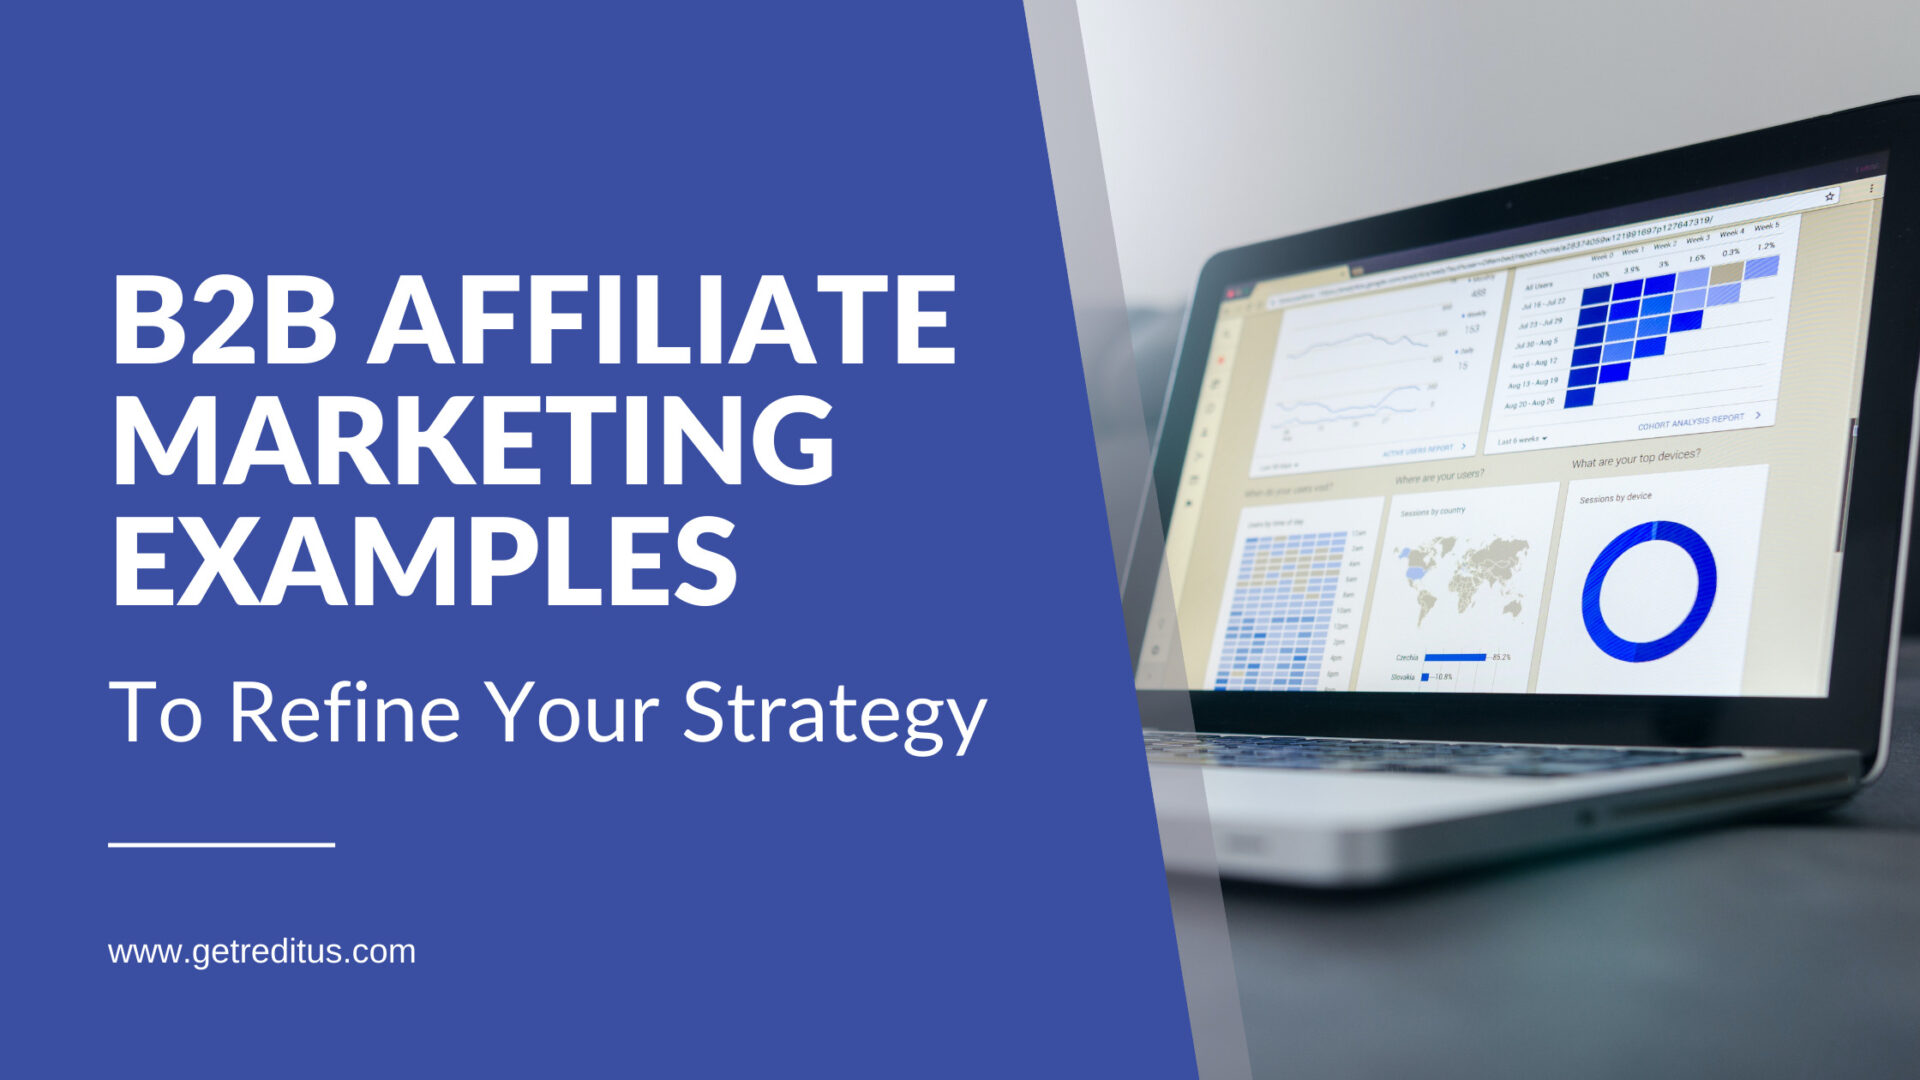 Discover 16 Winning B2B Affiliate Marketing Examples